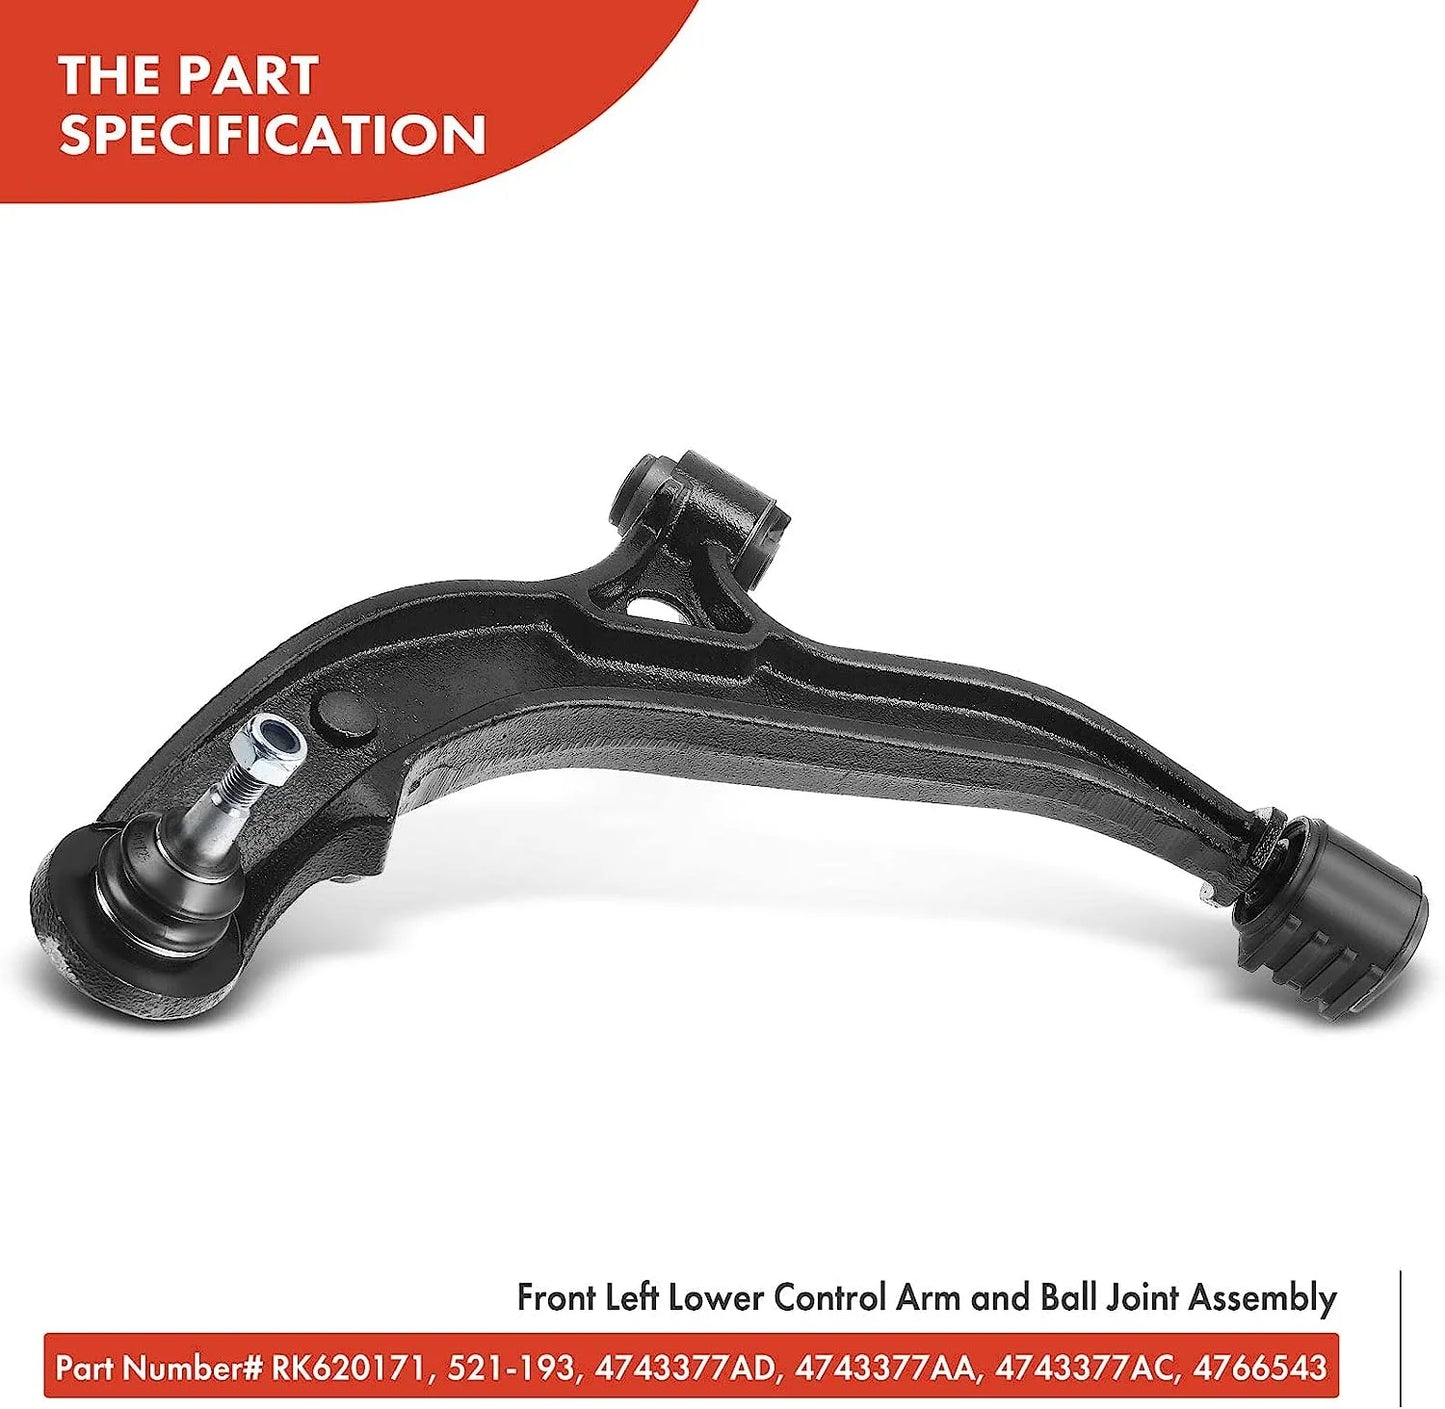 A-Premium Front Left Lower Control Arm, with Ball Joint & Bushing, Compatible with Dodge Grand Caravan 2001-2007, Chrysler Town & Country 2001-2007, Voyager 2001-2002, Replace # K620171 521-193